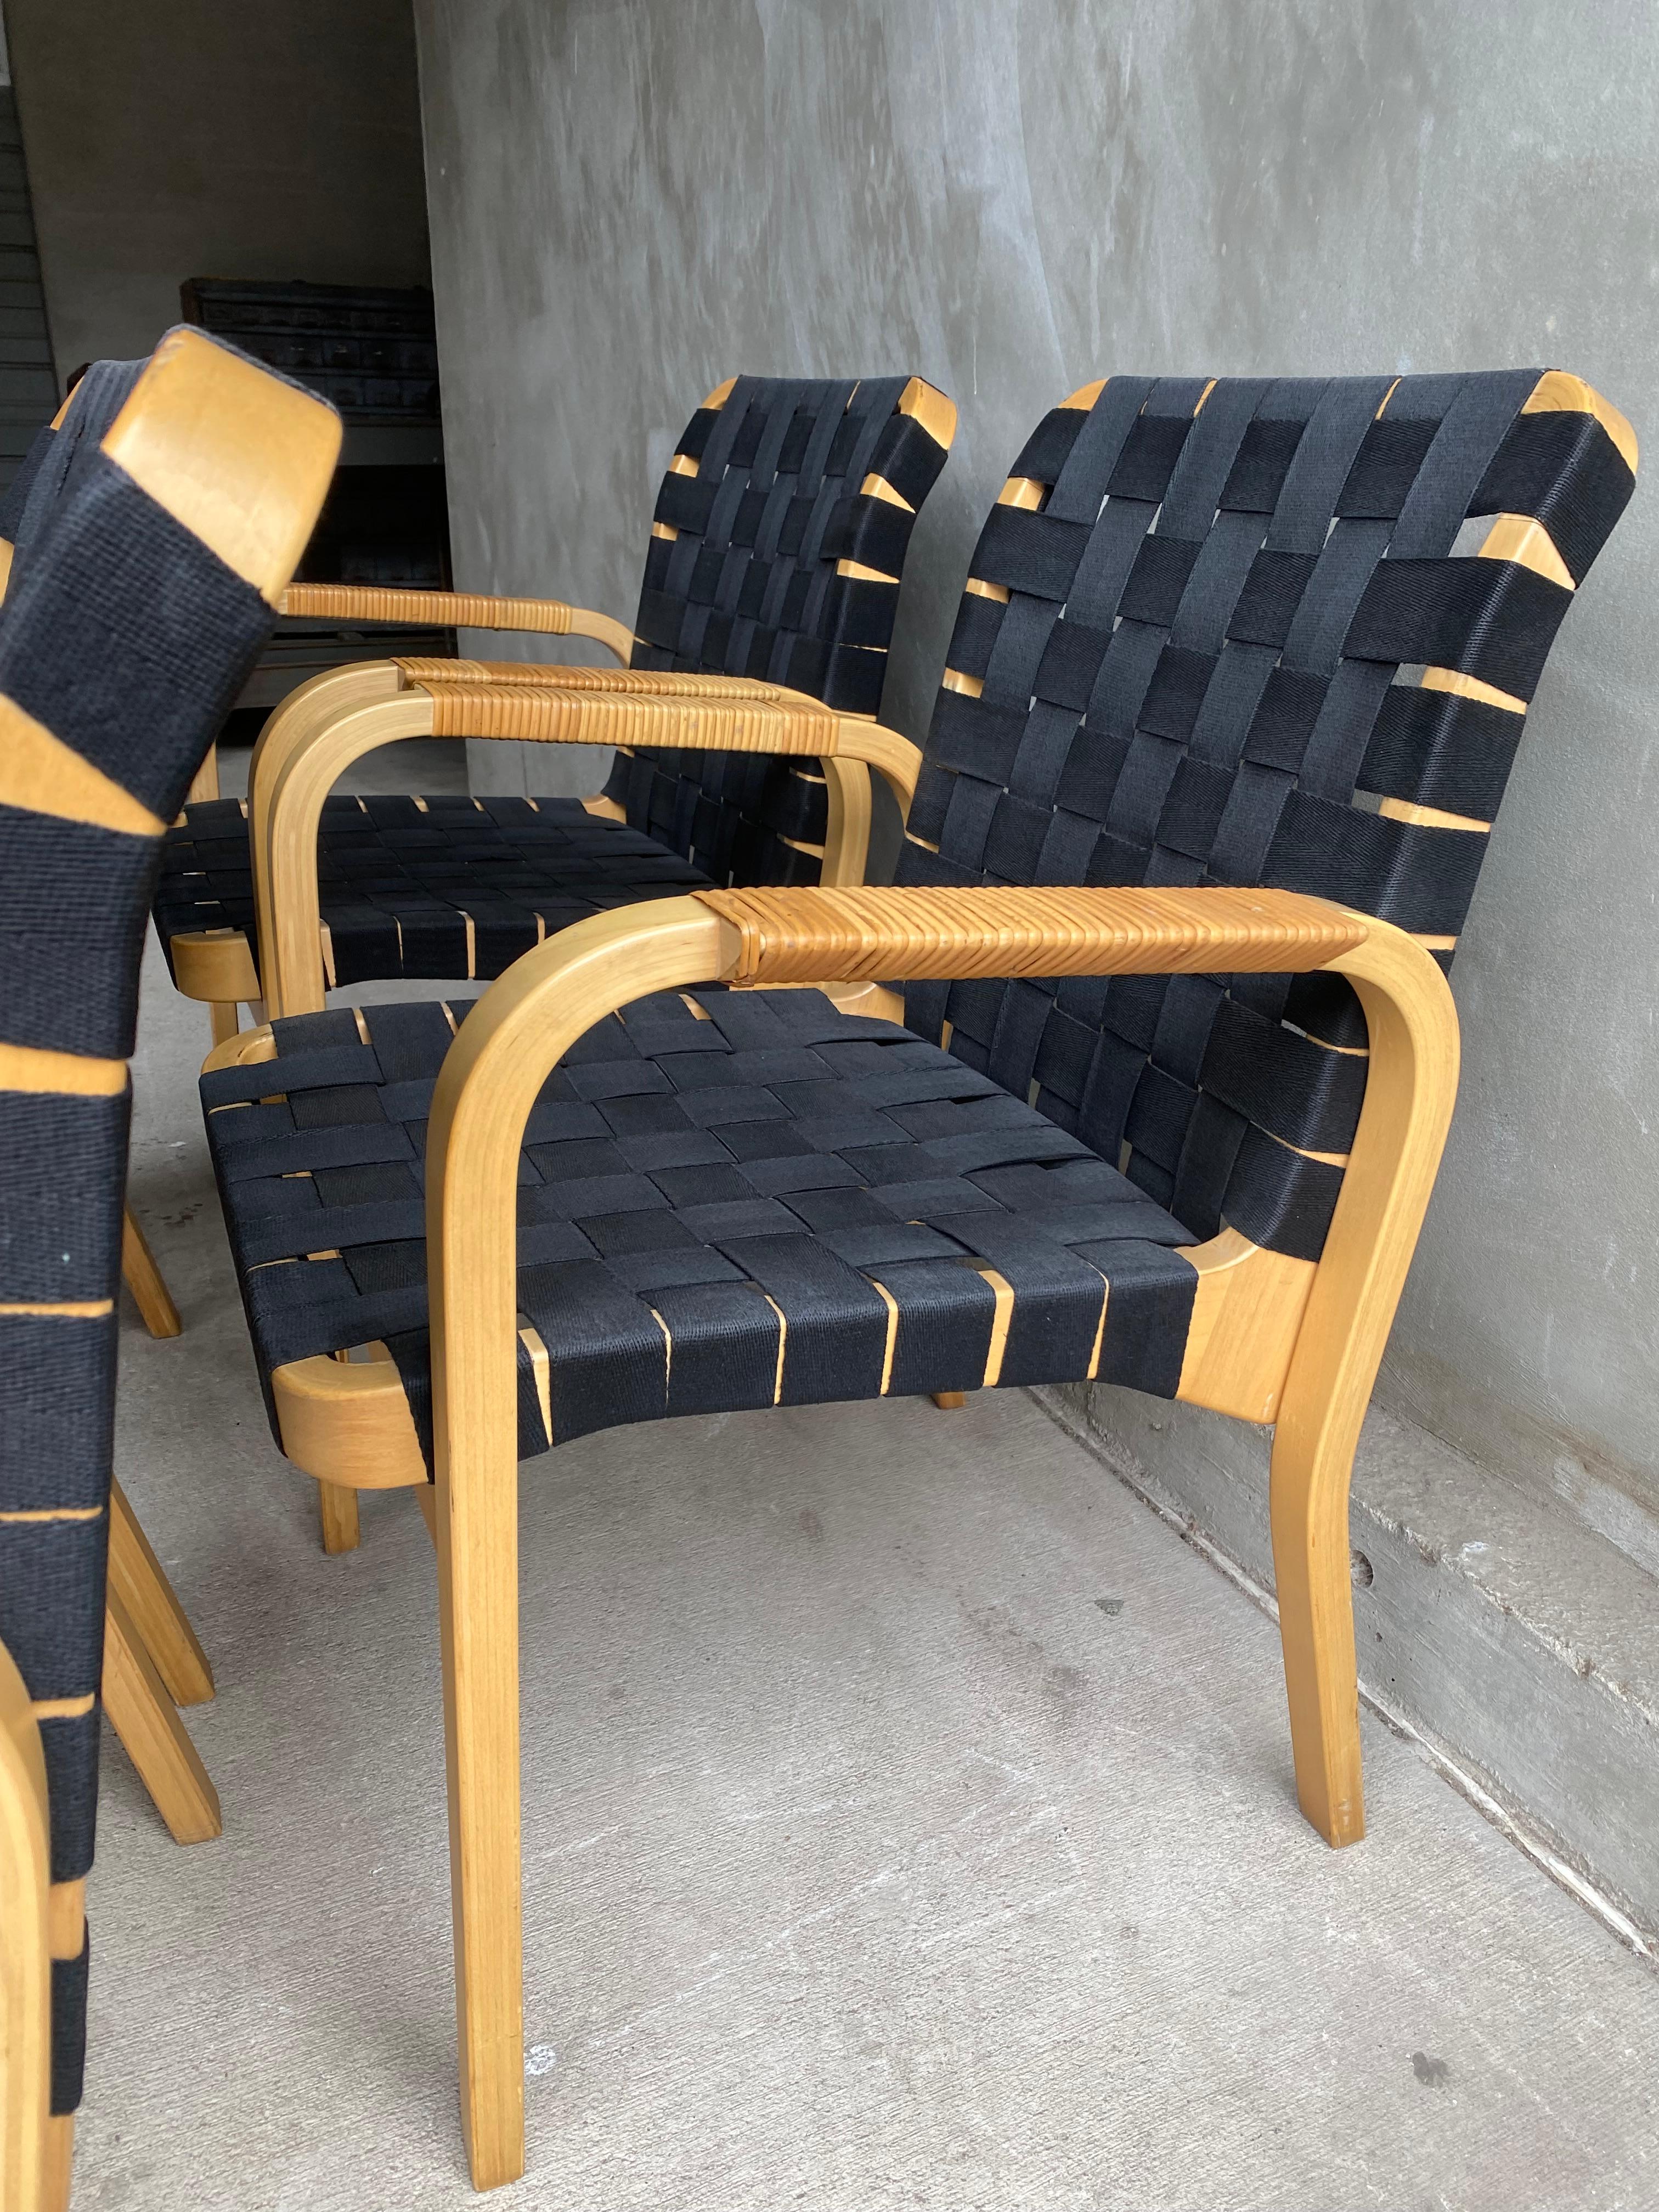 Set of 4 Alvar Aalto Chairs with Black Straps, Finland, 1960's For Sale 1